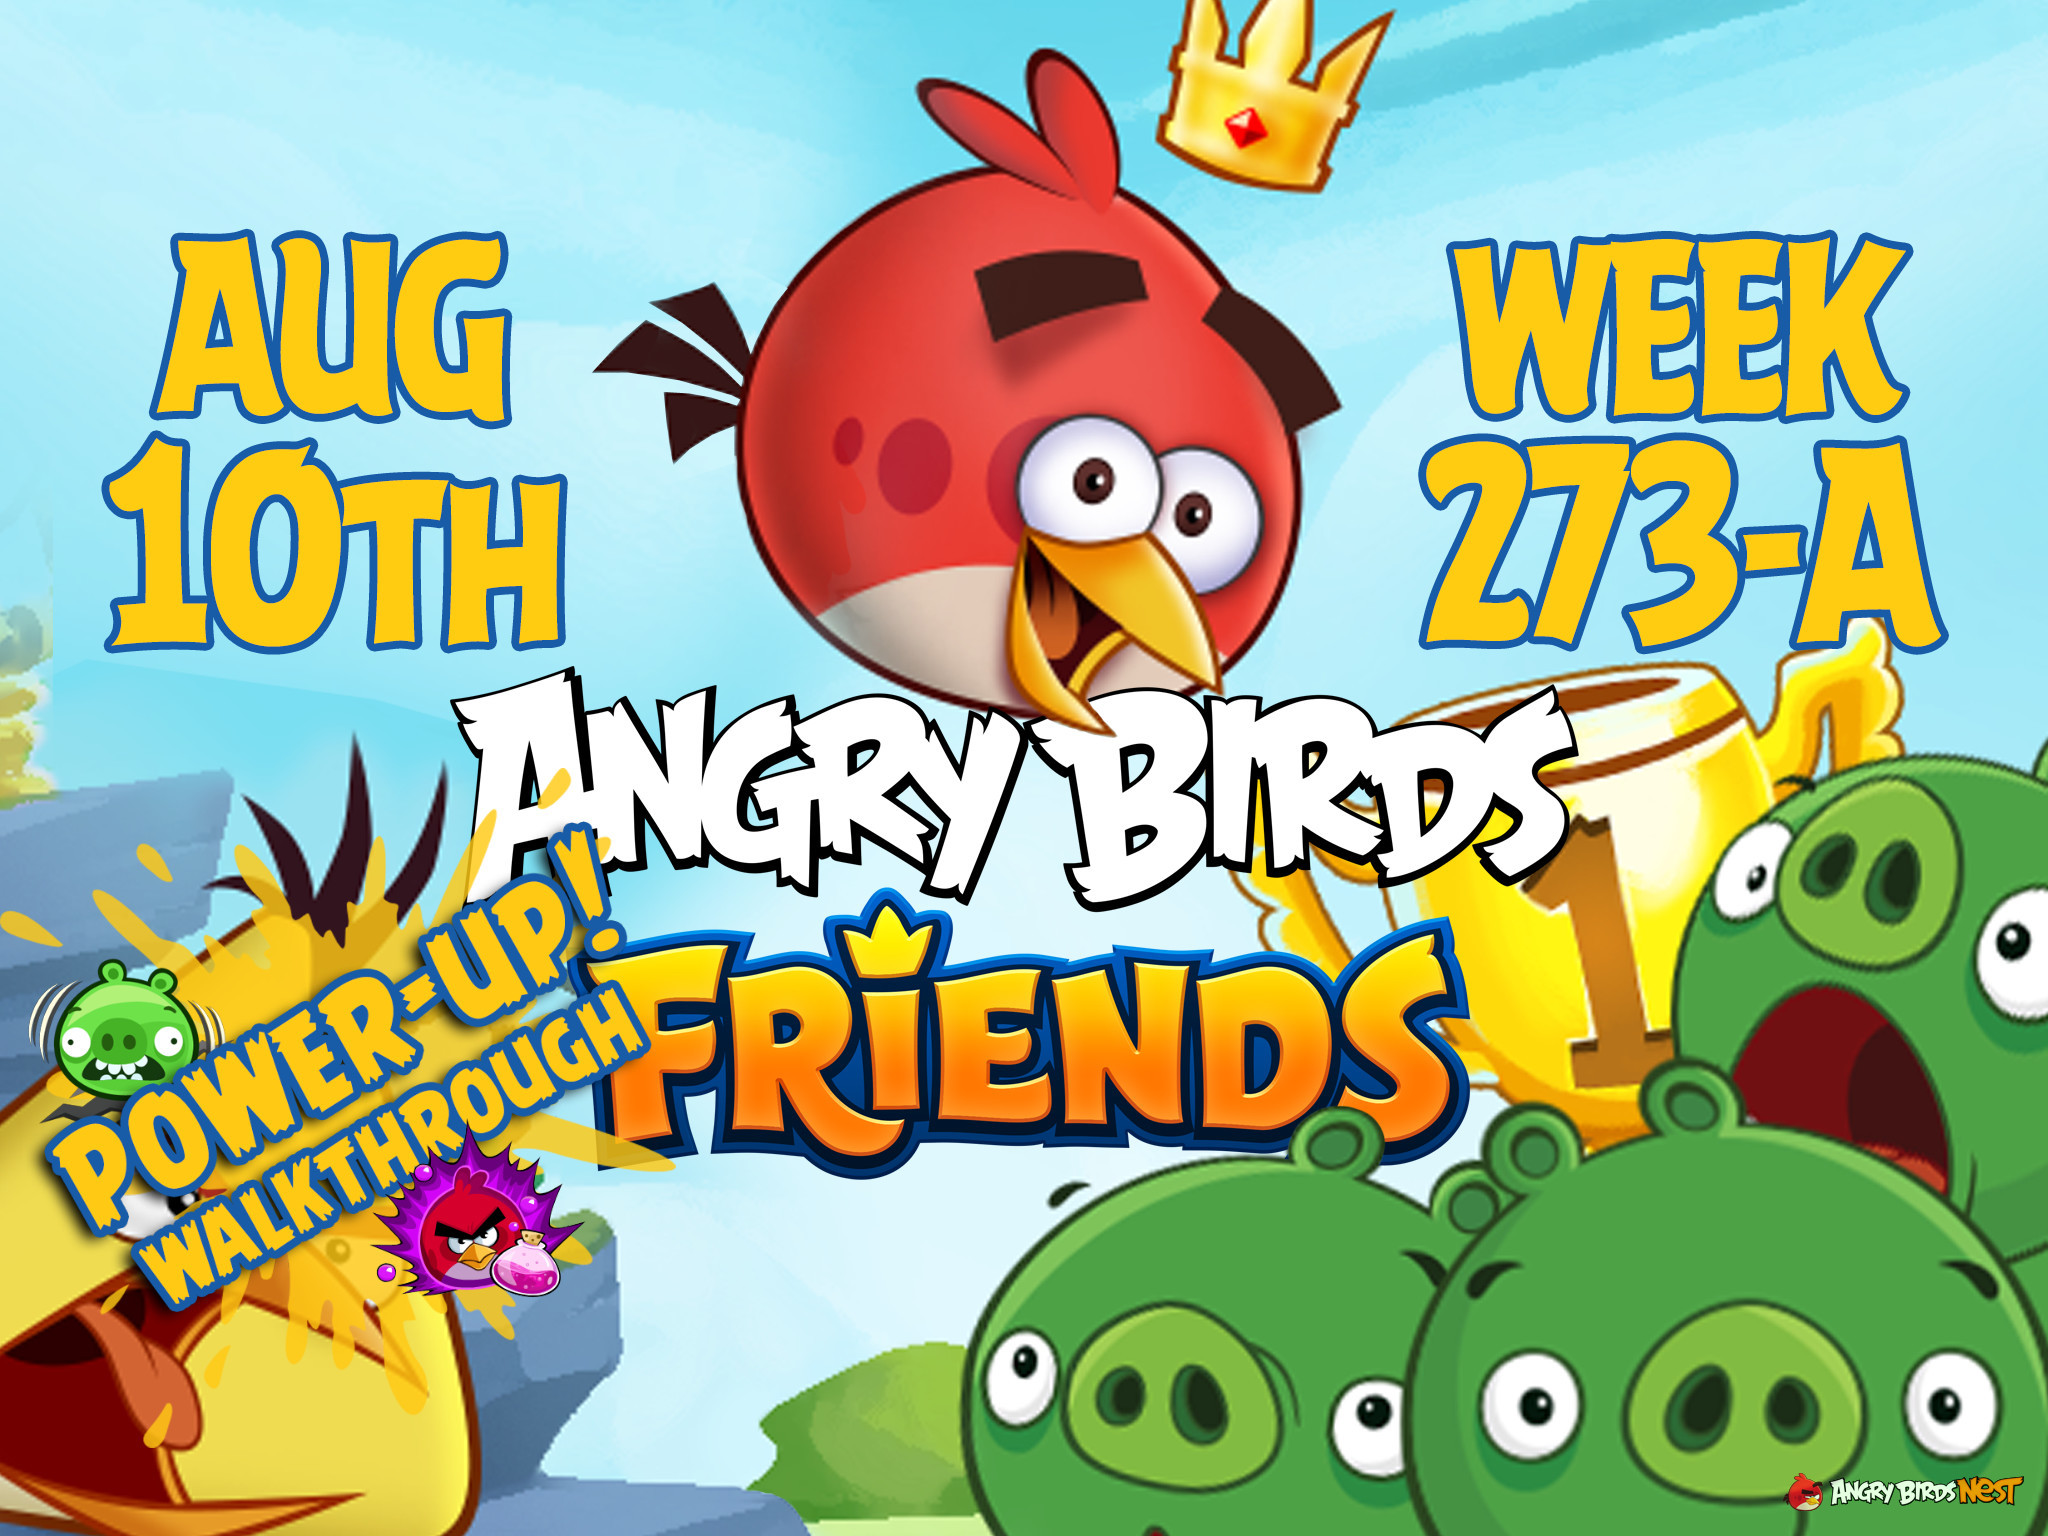 Angry Birds Friends Tournament Week 273-A Feature Image PU